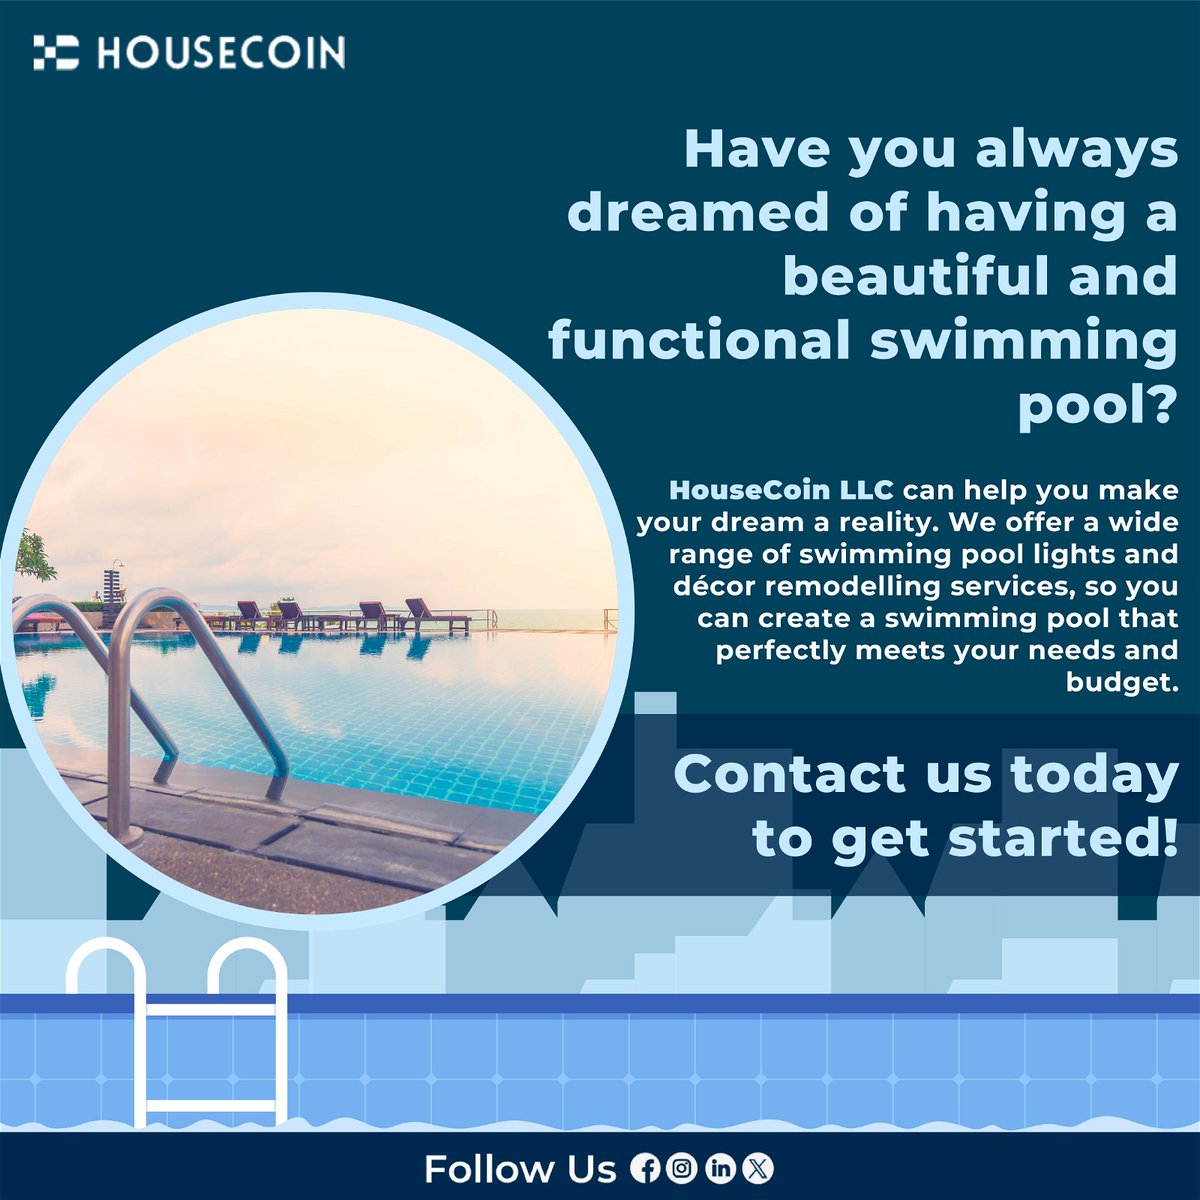 Dreaming of making a splash this summer? ☀️🏊‍♂️ Transform everyday into a pool party with your very own functional swimming pool! 💦 #StayCool #PoolGoals
#summerdreams #poolparty #staycool #poolgoals #swimmingpool